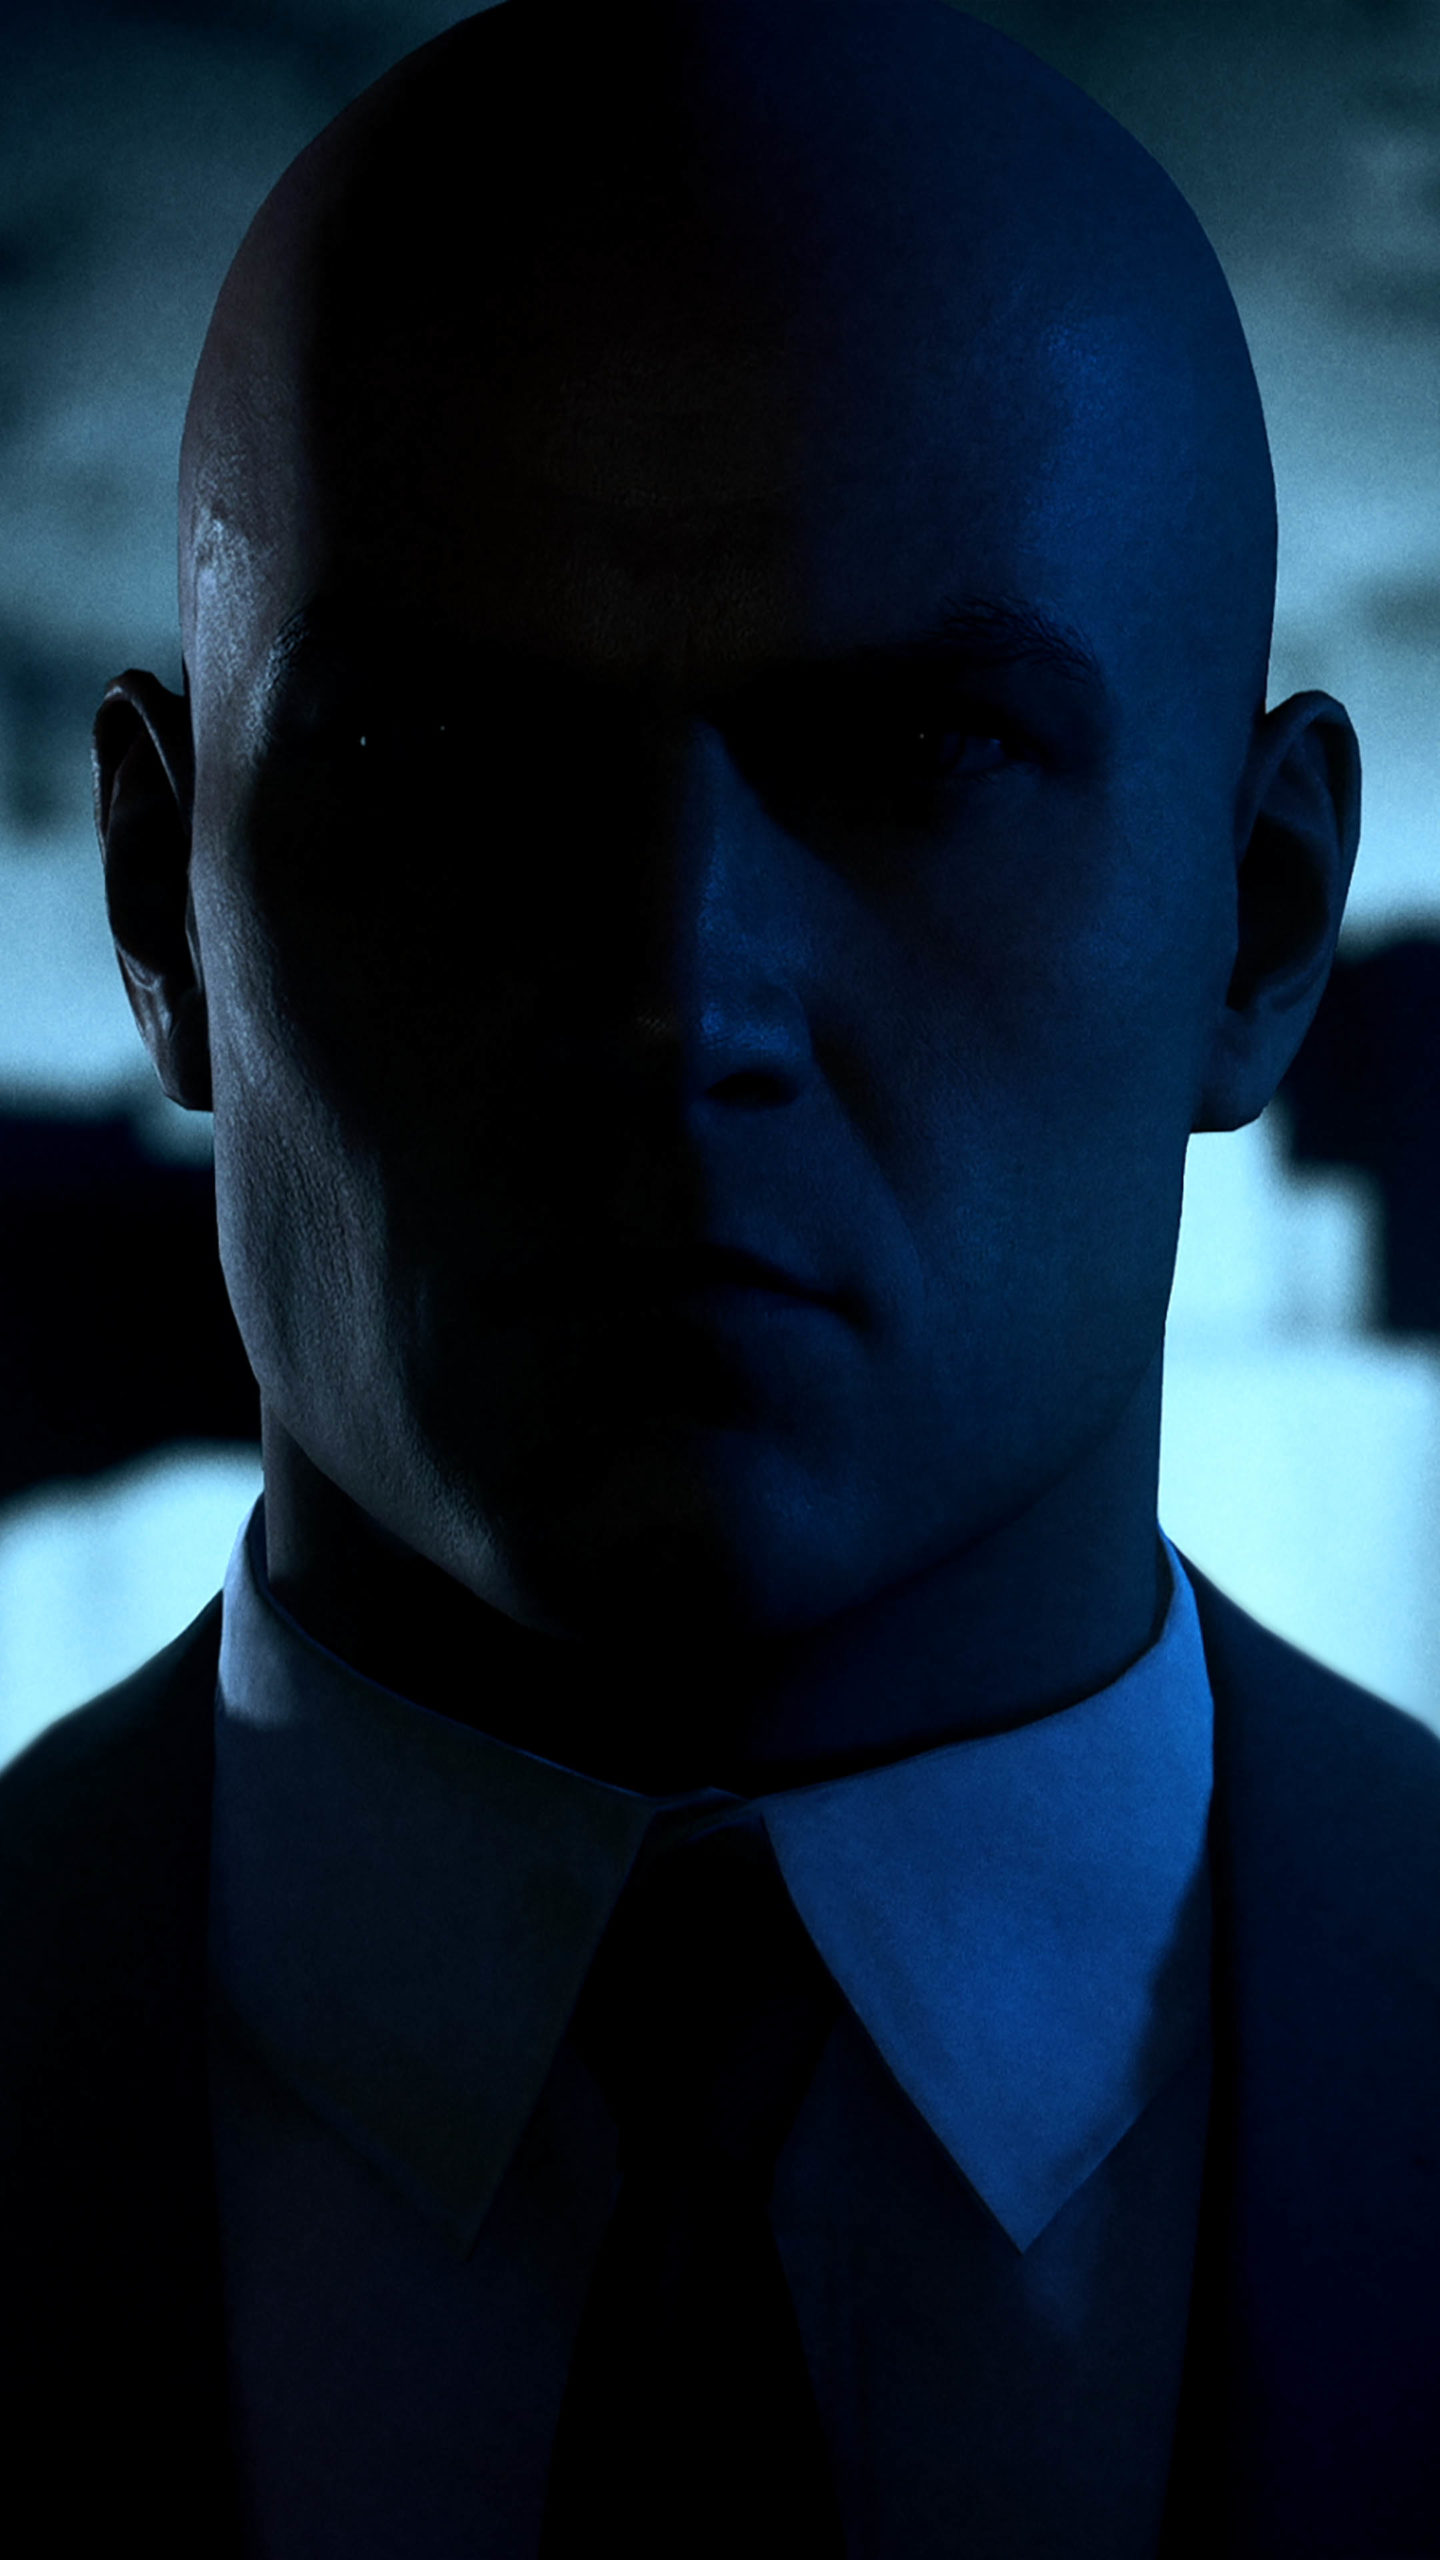 New Hitman 3 4K Wallpaper HD Games 4K Wallpapers Images and Background   Wallpapers Den